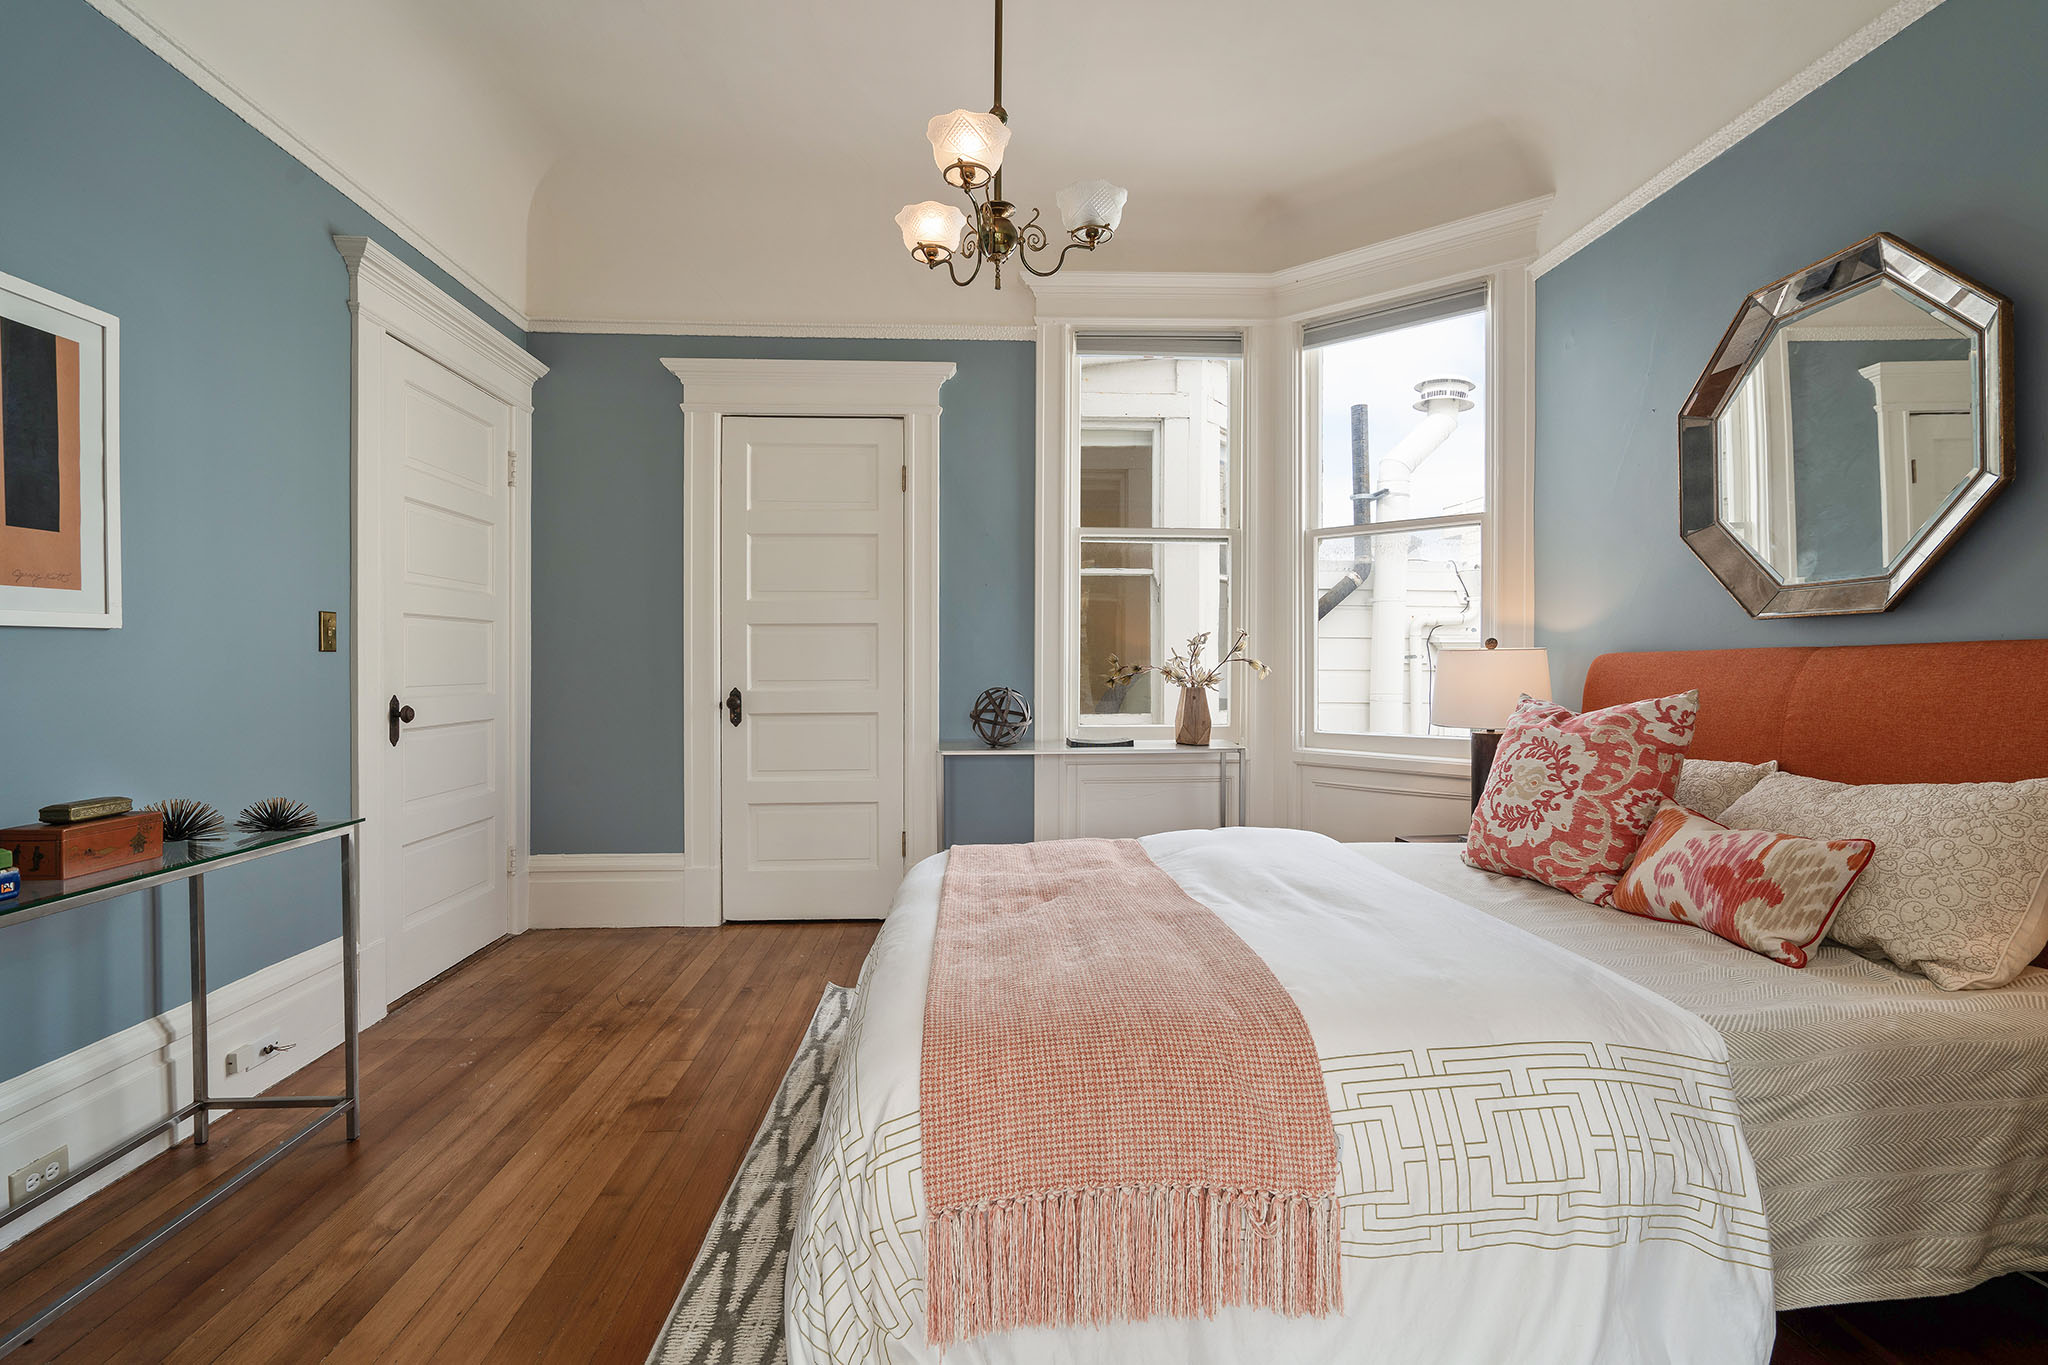 Property Photo: Bedroom with wood floors and white wood trim